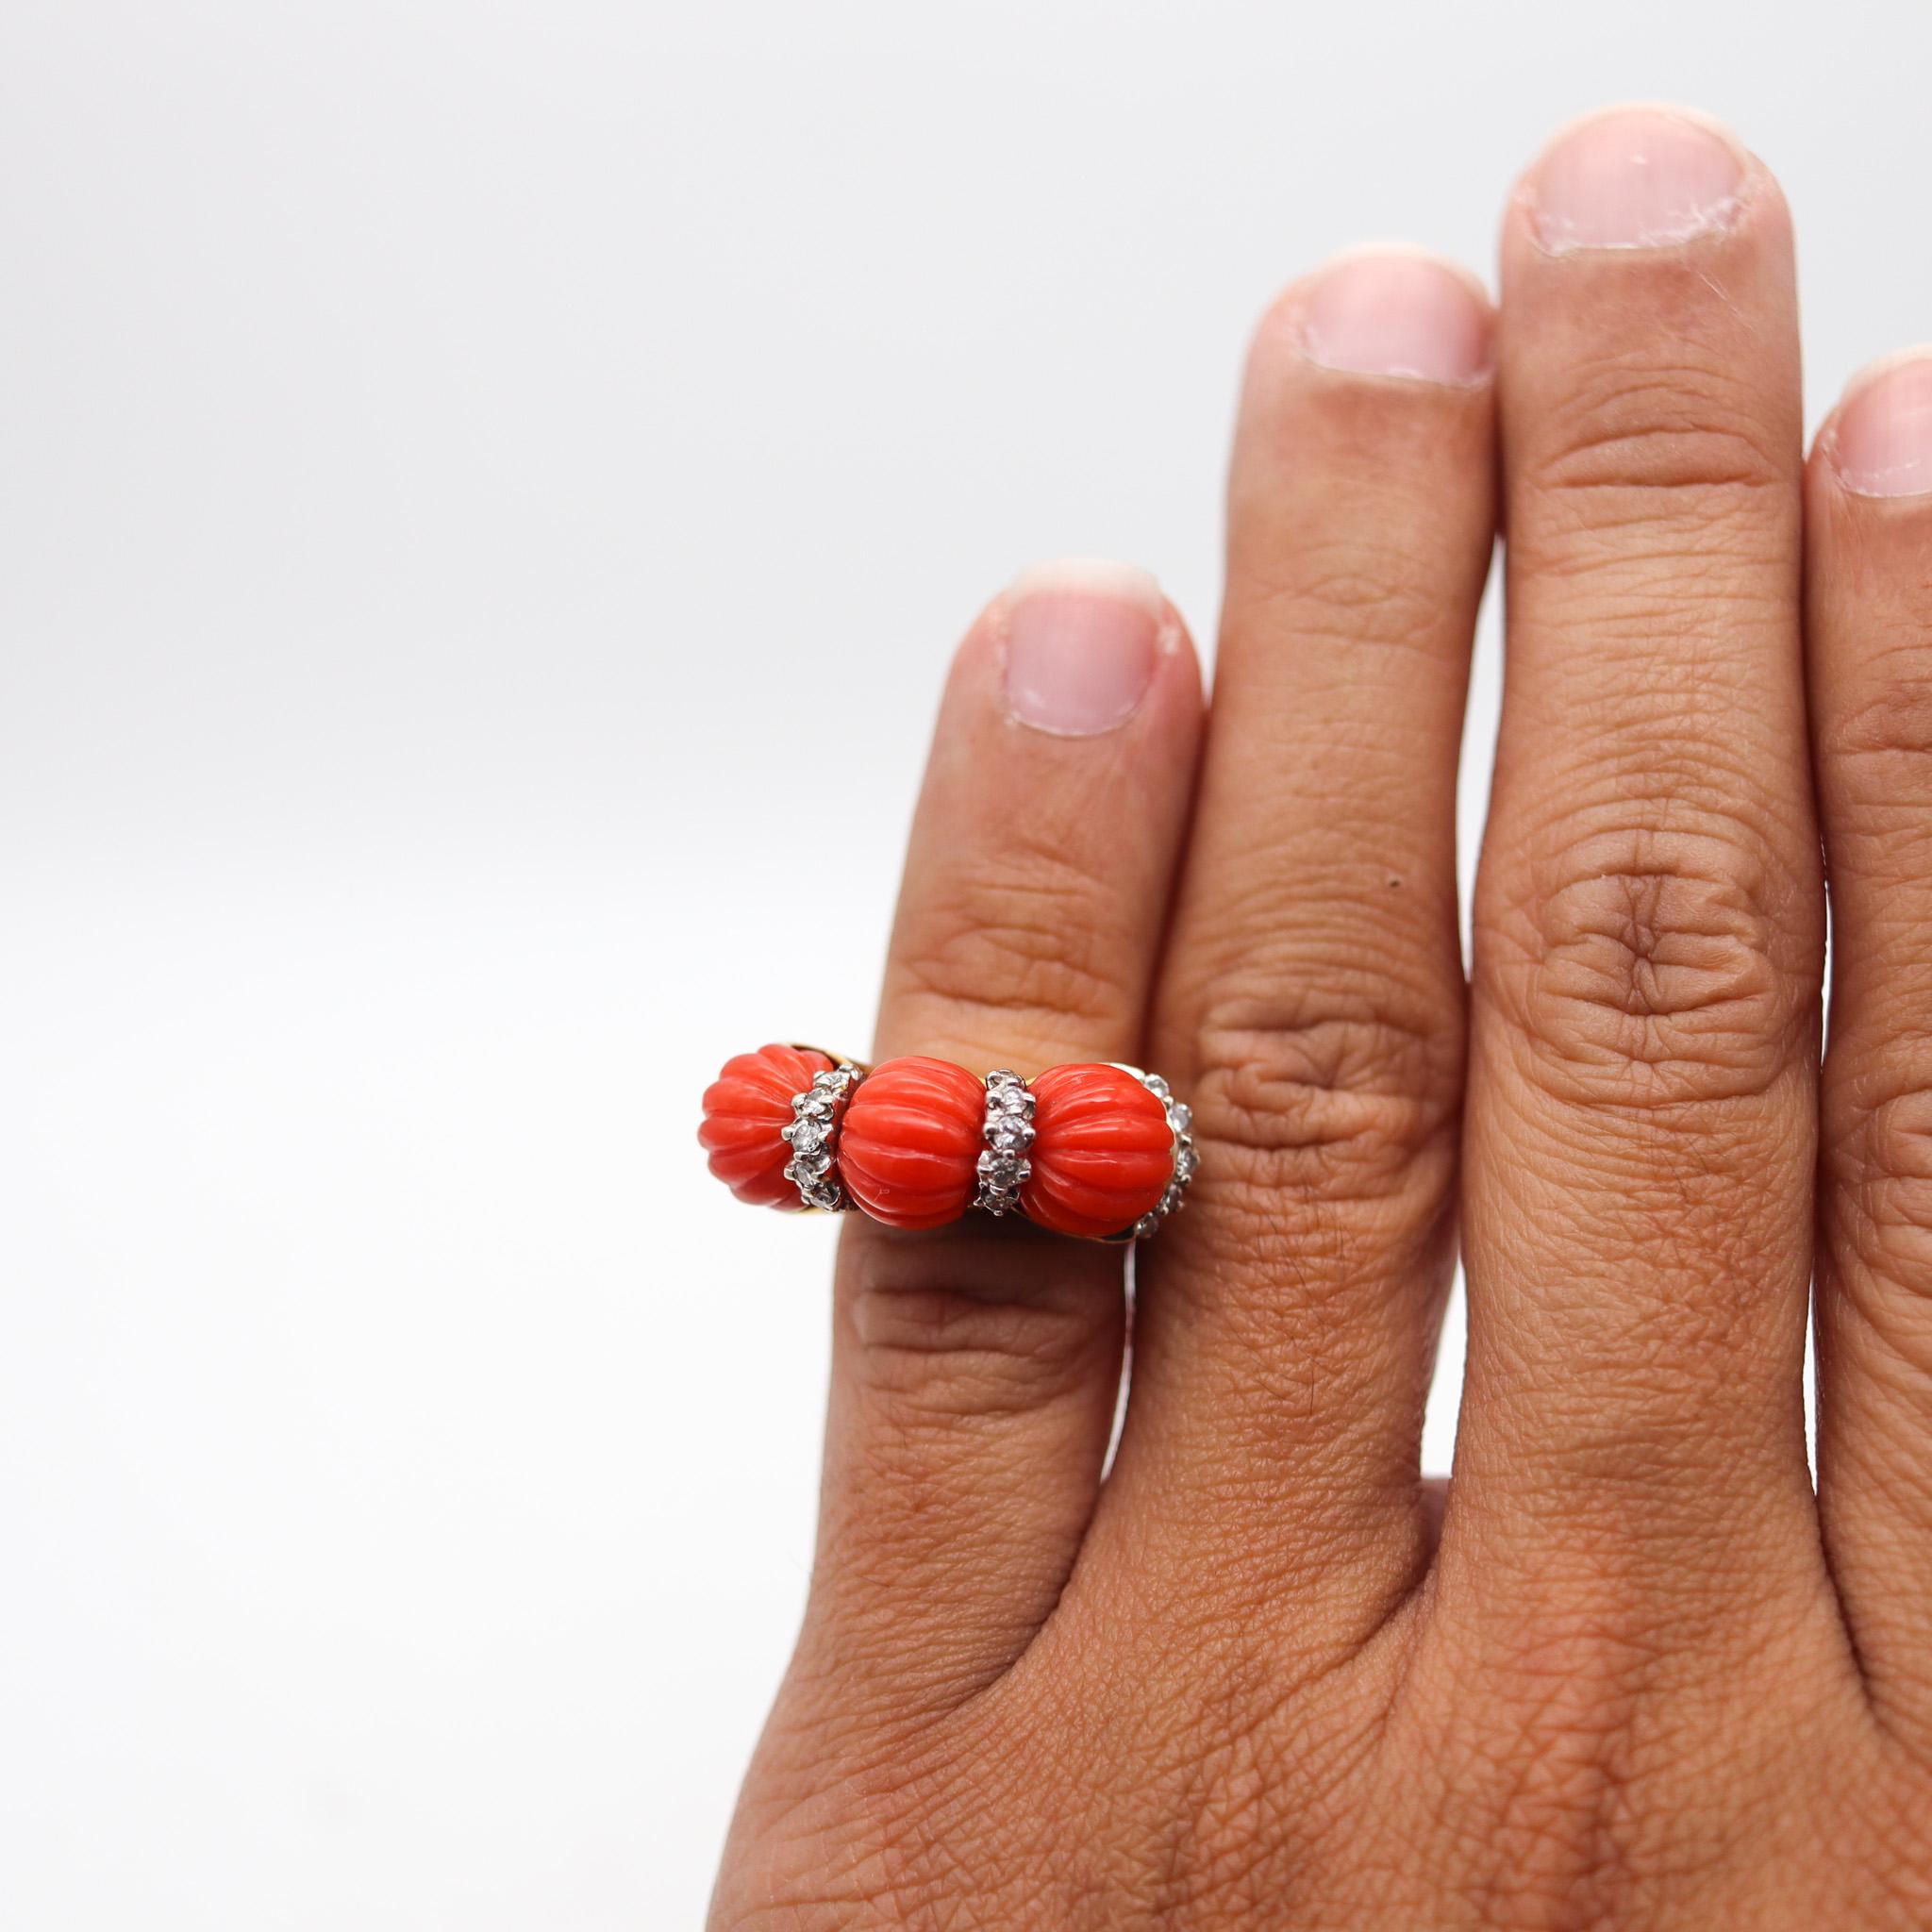 Francesco Passaretta 1970 Fluted Sardinian Coral Ring In 18Kt Gold With Diamonds For Sale 1